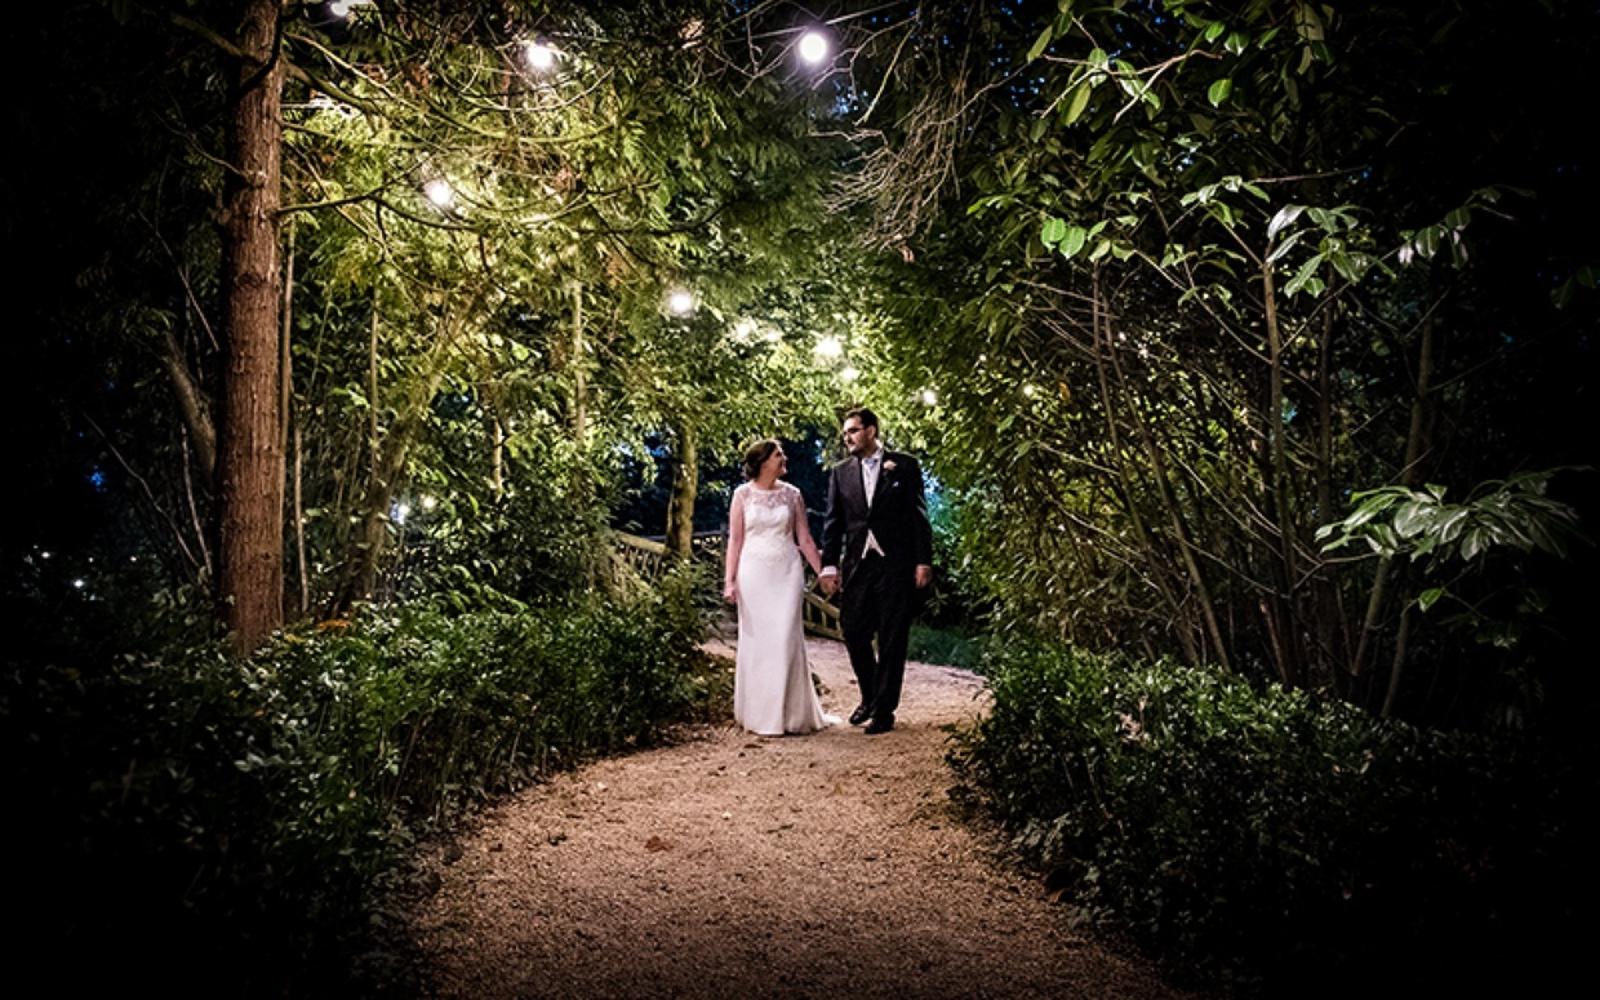 Capture Every Moment Real Wedding photographer Cirencester Manor by the Lake Cheltenham string lighting 